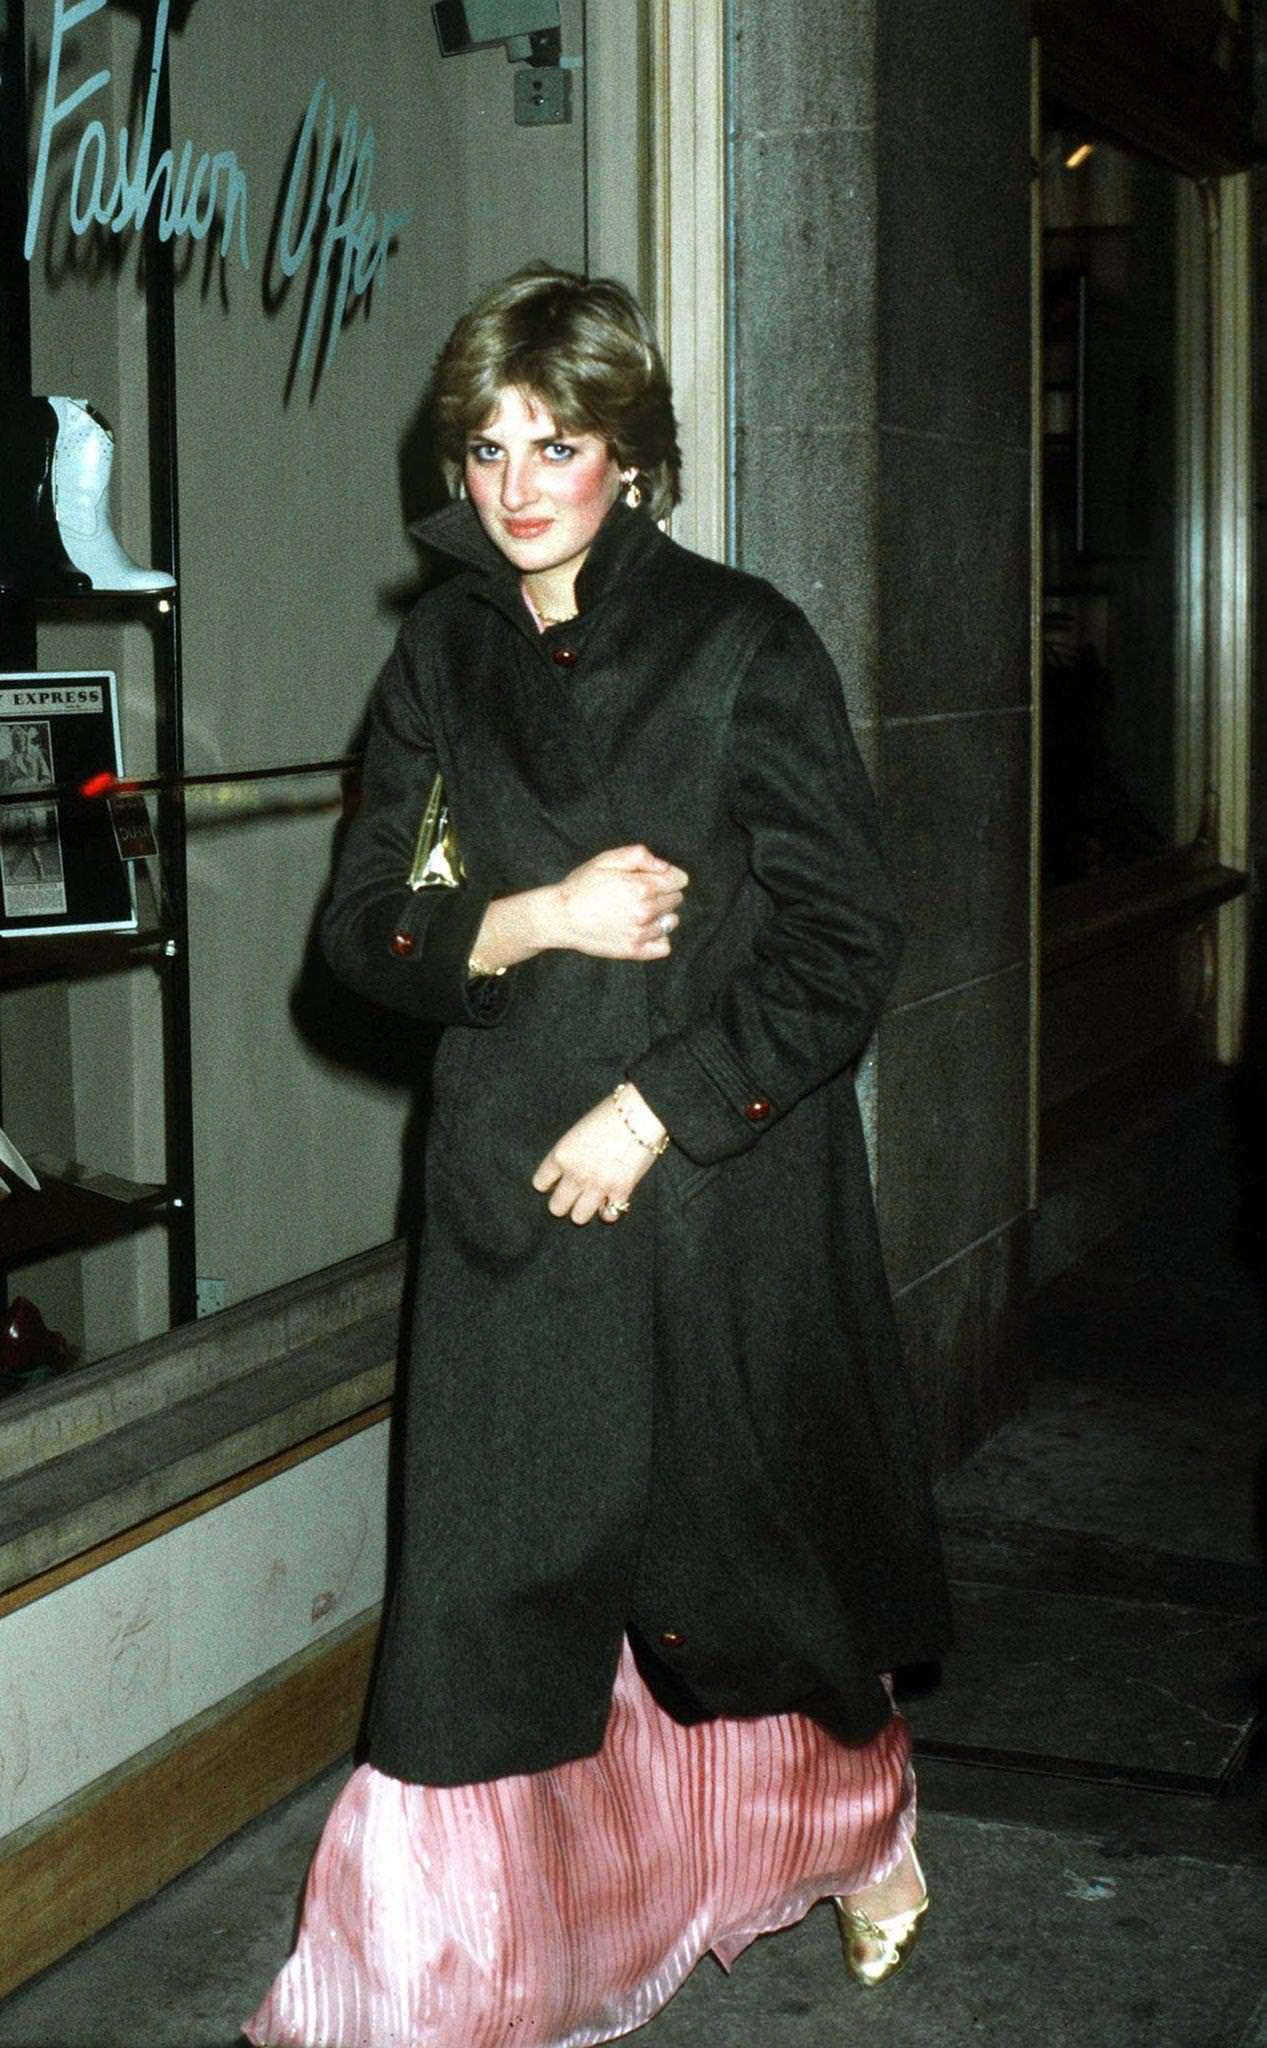 Lady Diana Spencer leaves the Ritz Hotel in London after attending Princess Margaret's 50th birthday party, November 1980.